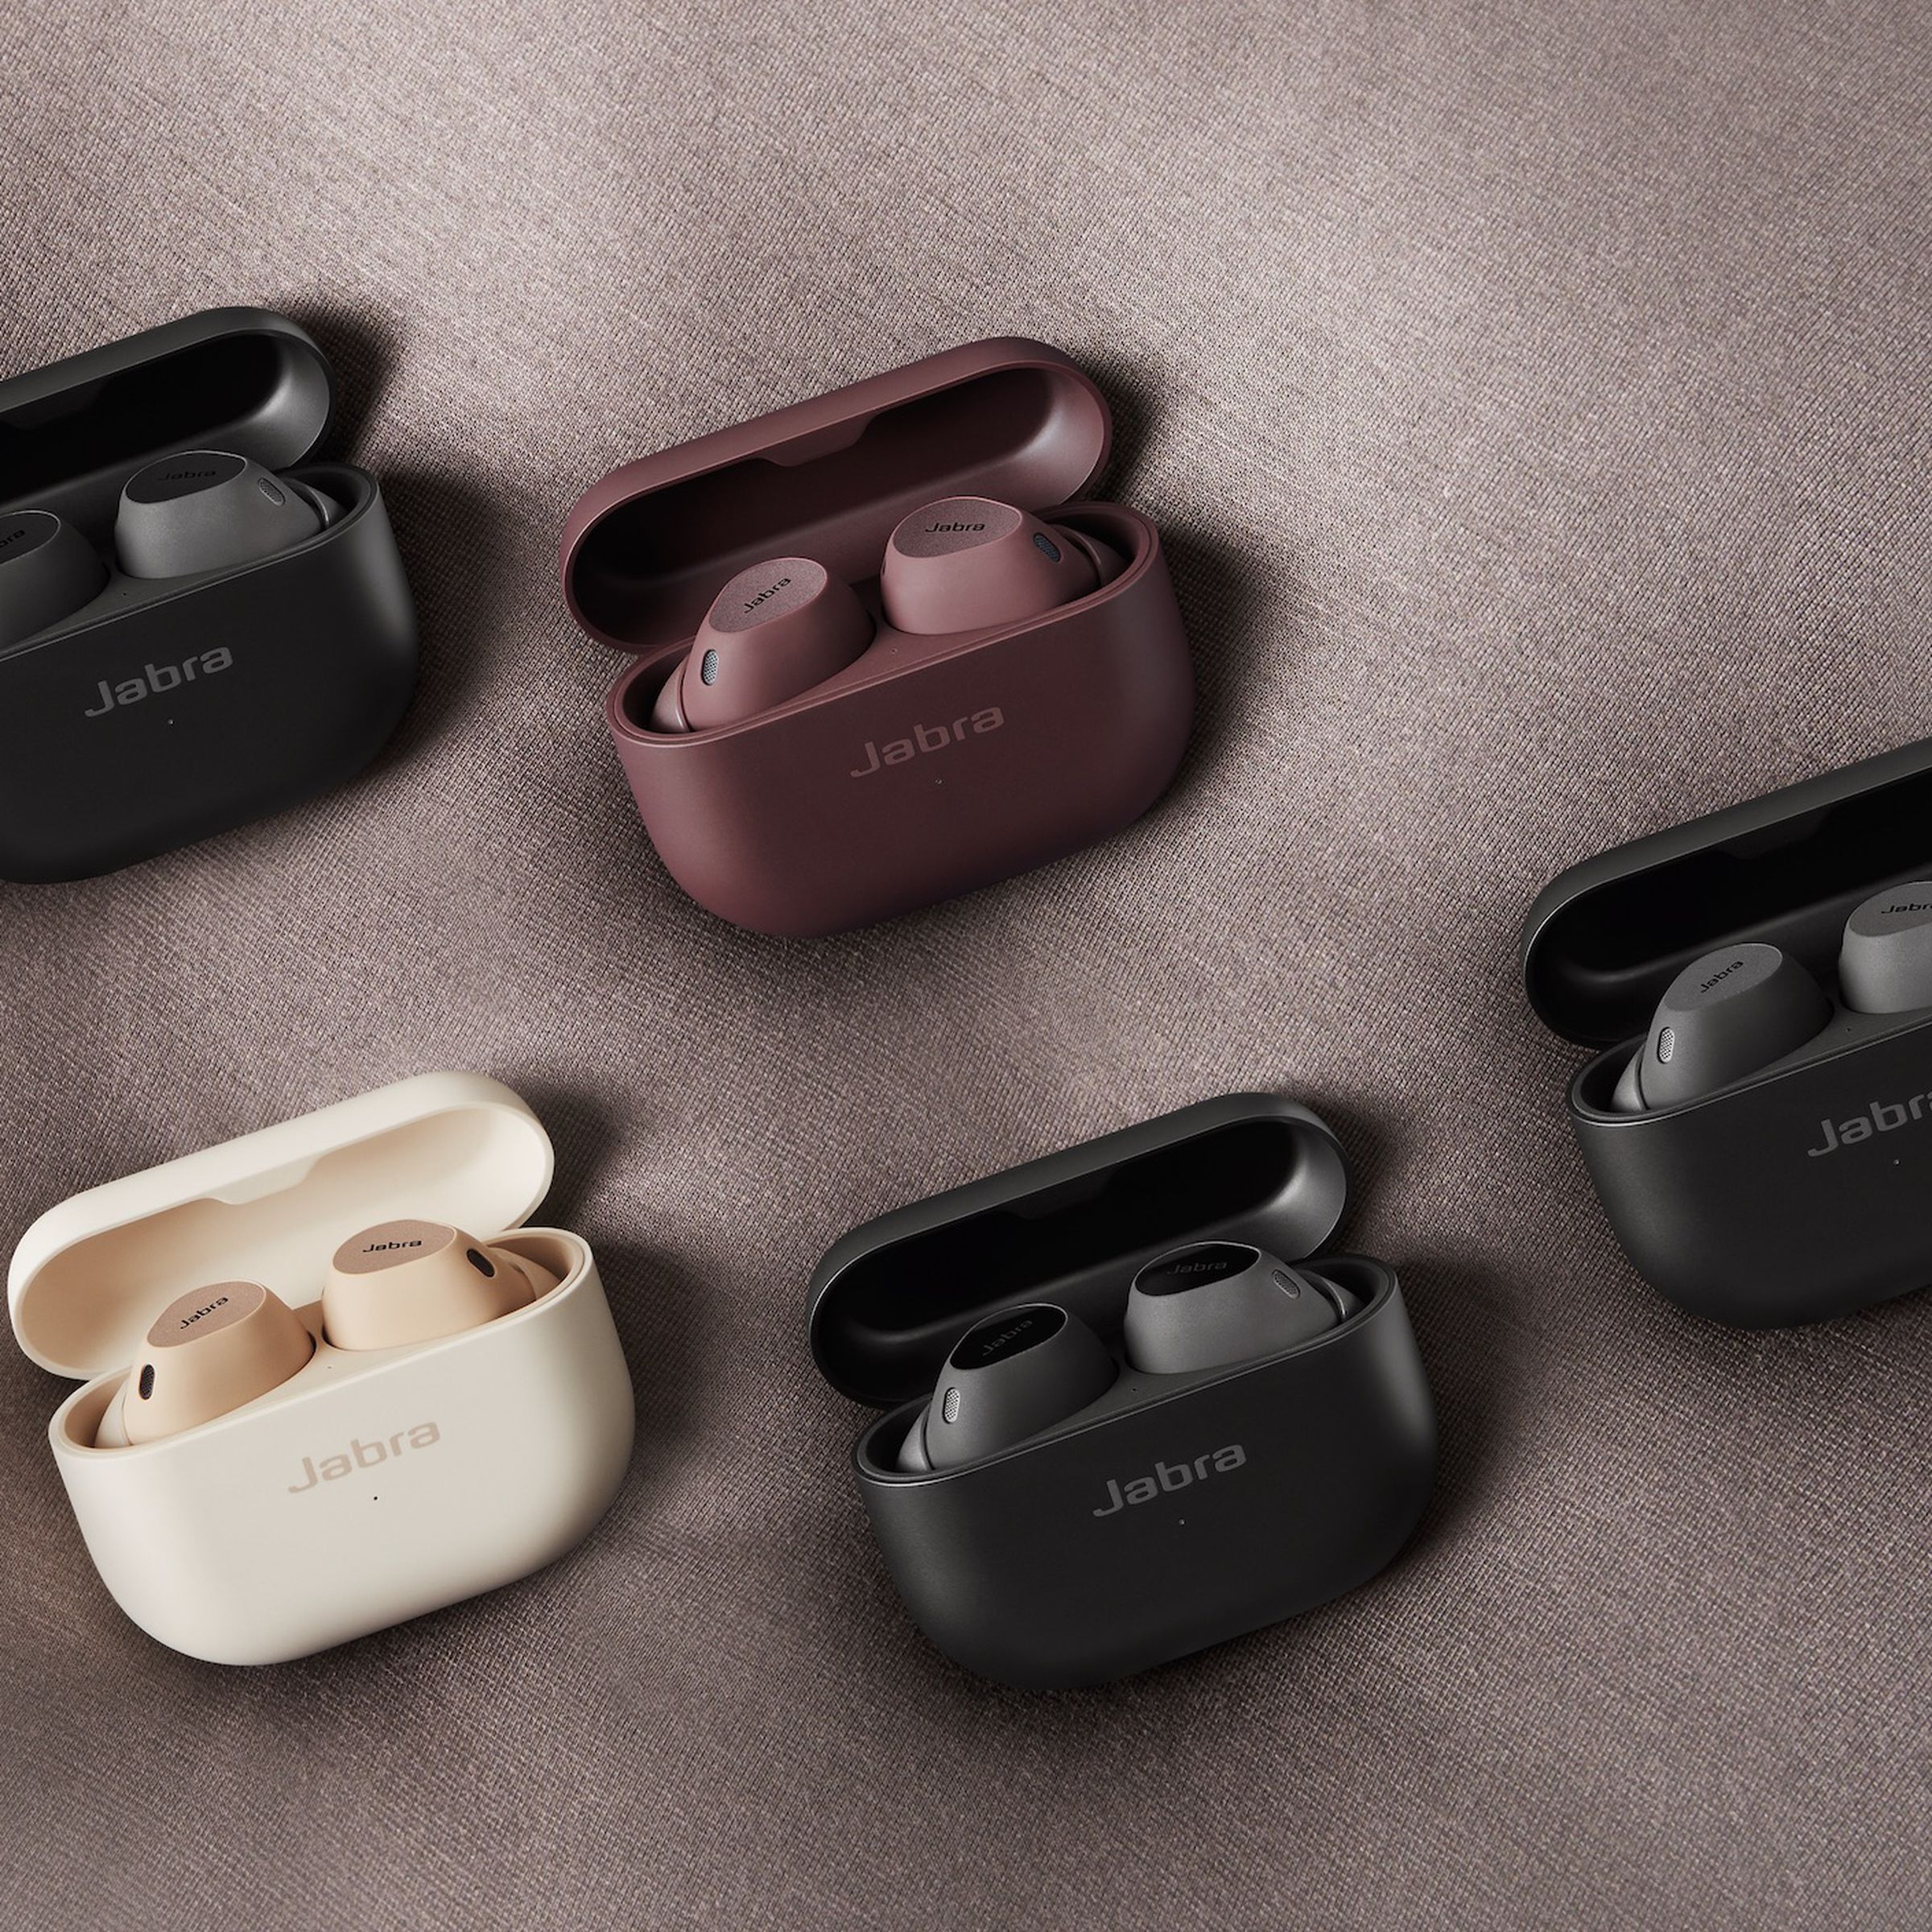 A marketing image showing the different colors of Jabra’s Elite 10 earbuds.